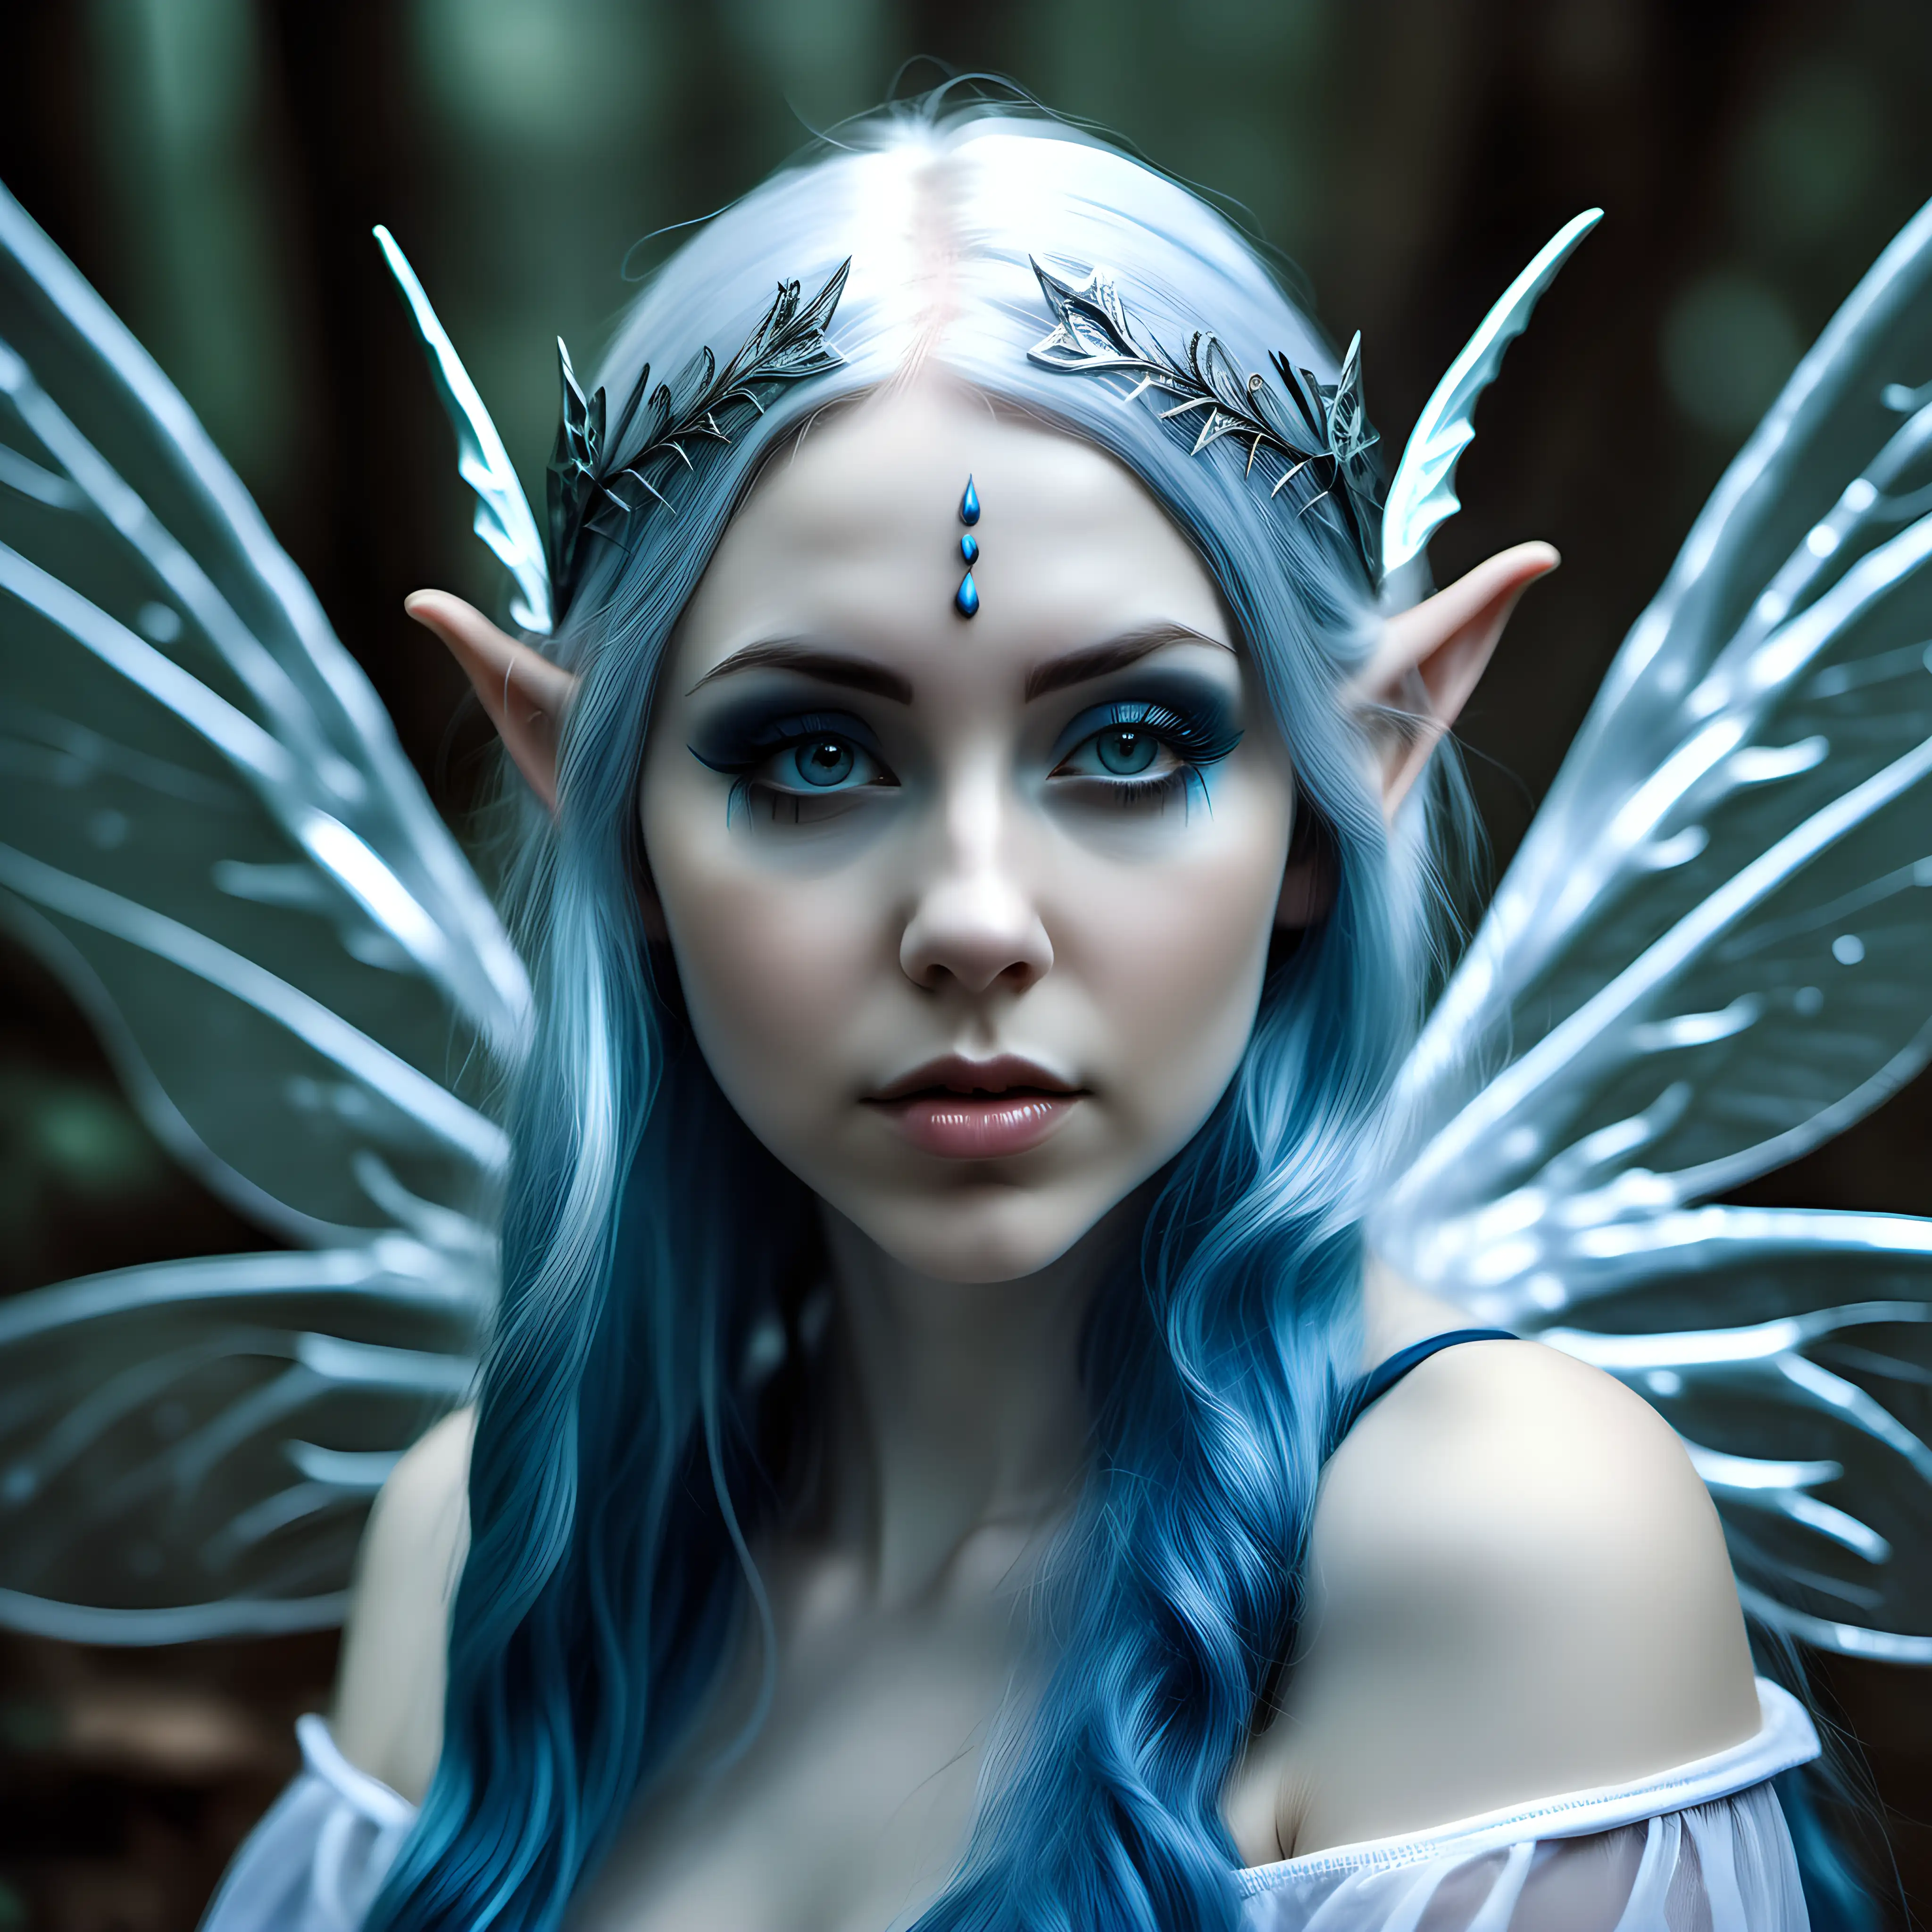 Beautiful voluptuous female ice elf, gossamer fairy wings, age 27 years, pale white skin, pointy ears, long blue hair, contemplative expression that reflects longing, fantasy style, closeup portrait, photography